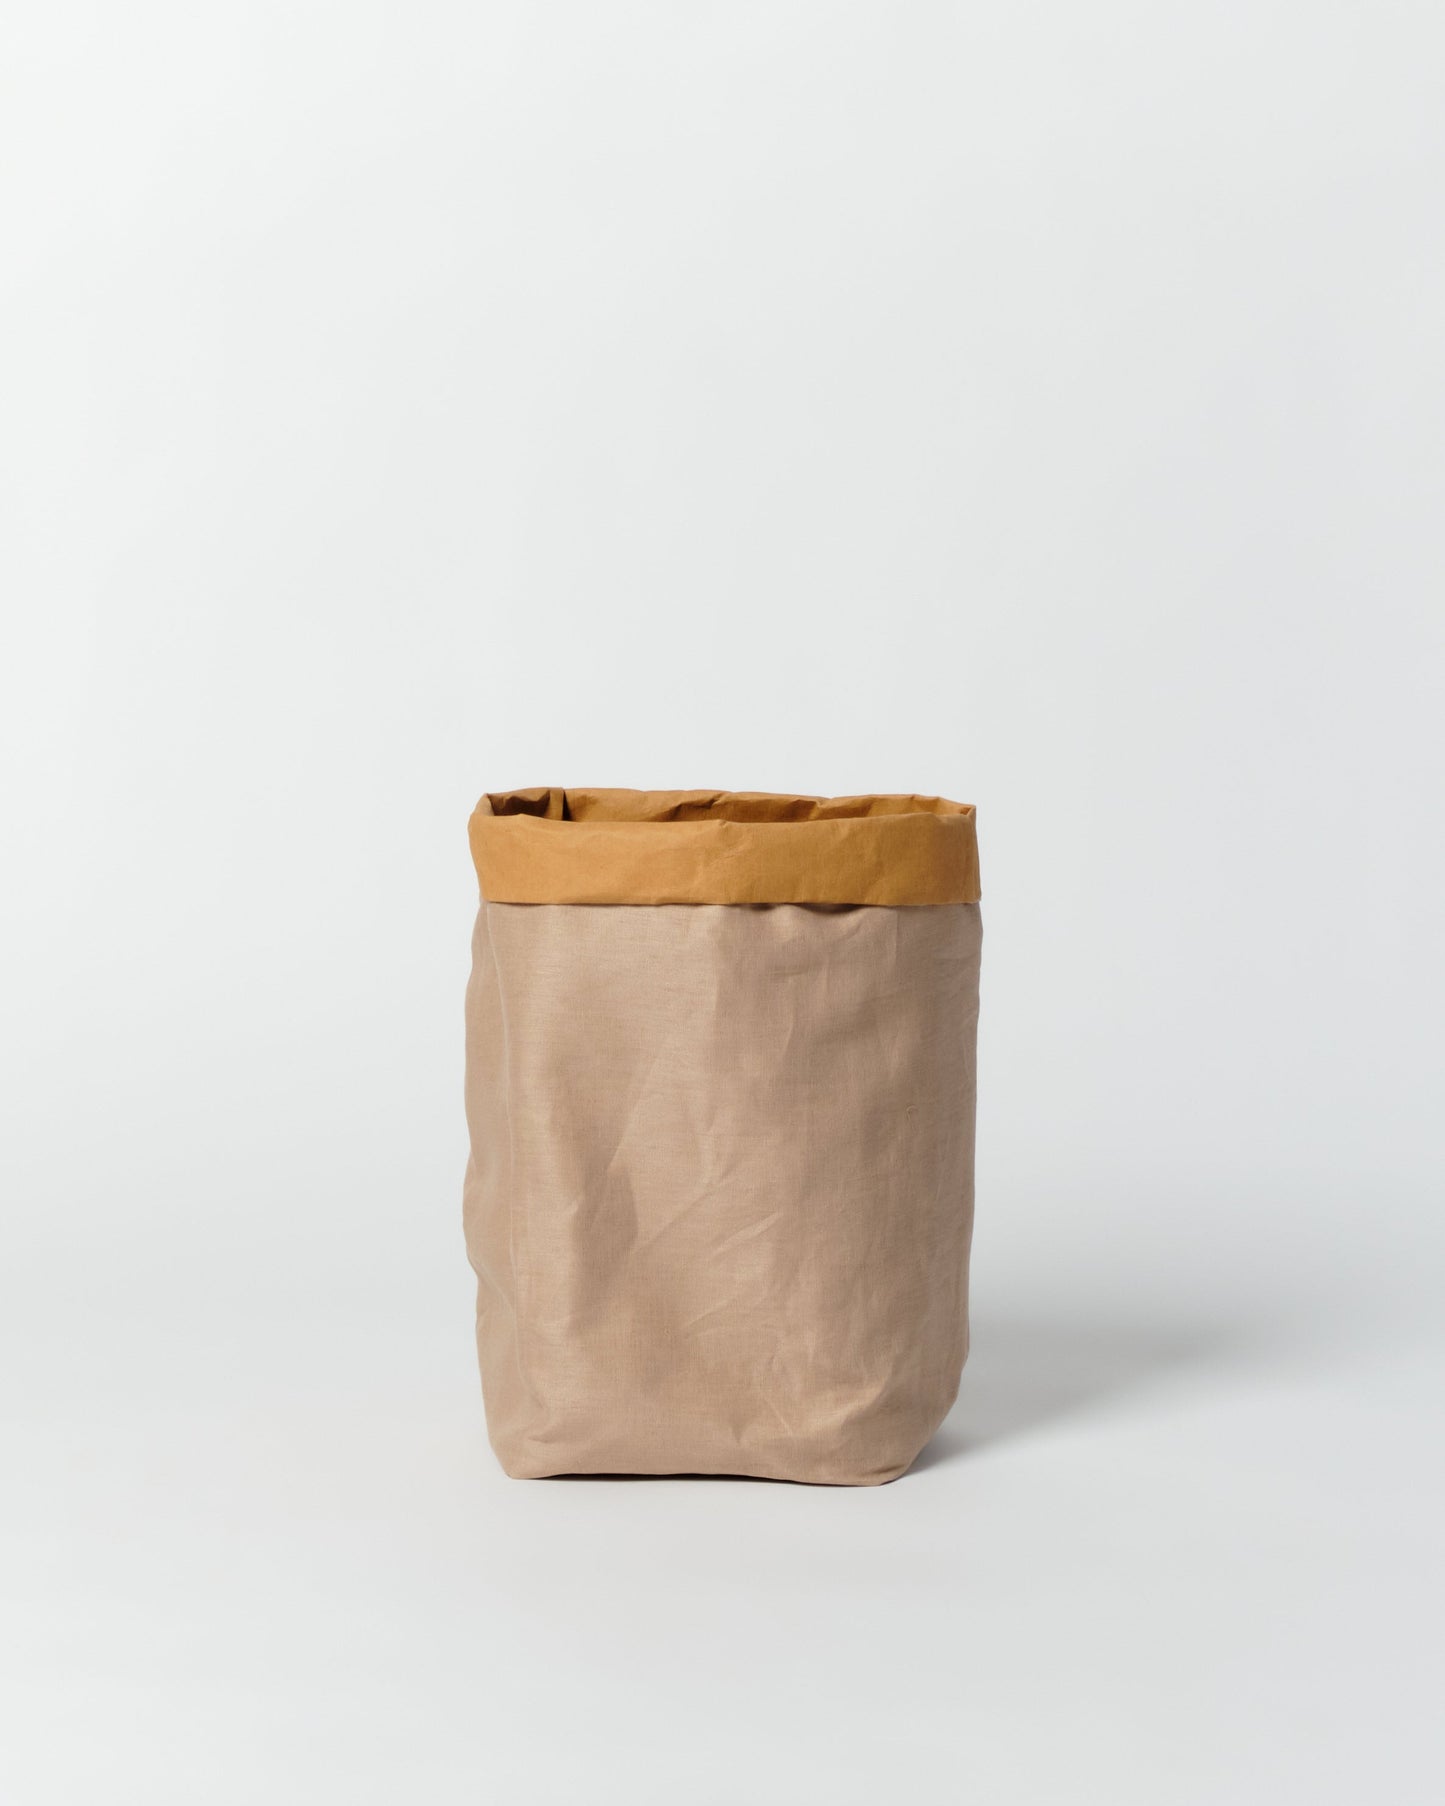 Rustic Natural style Linen storage bag made from washable and reusable paper + natural Linen. Vegan Leather bag as storage